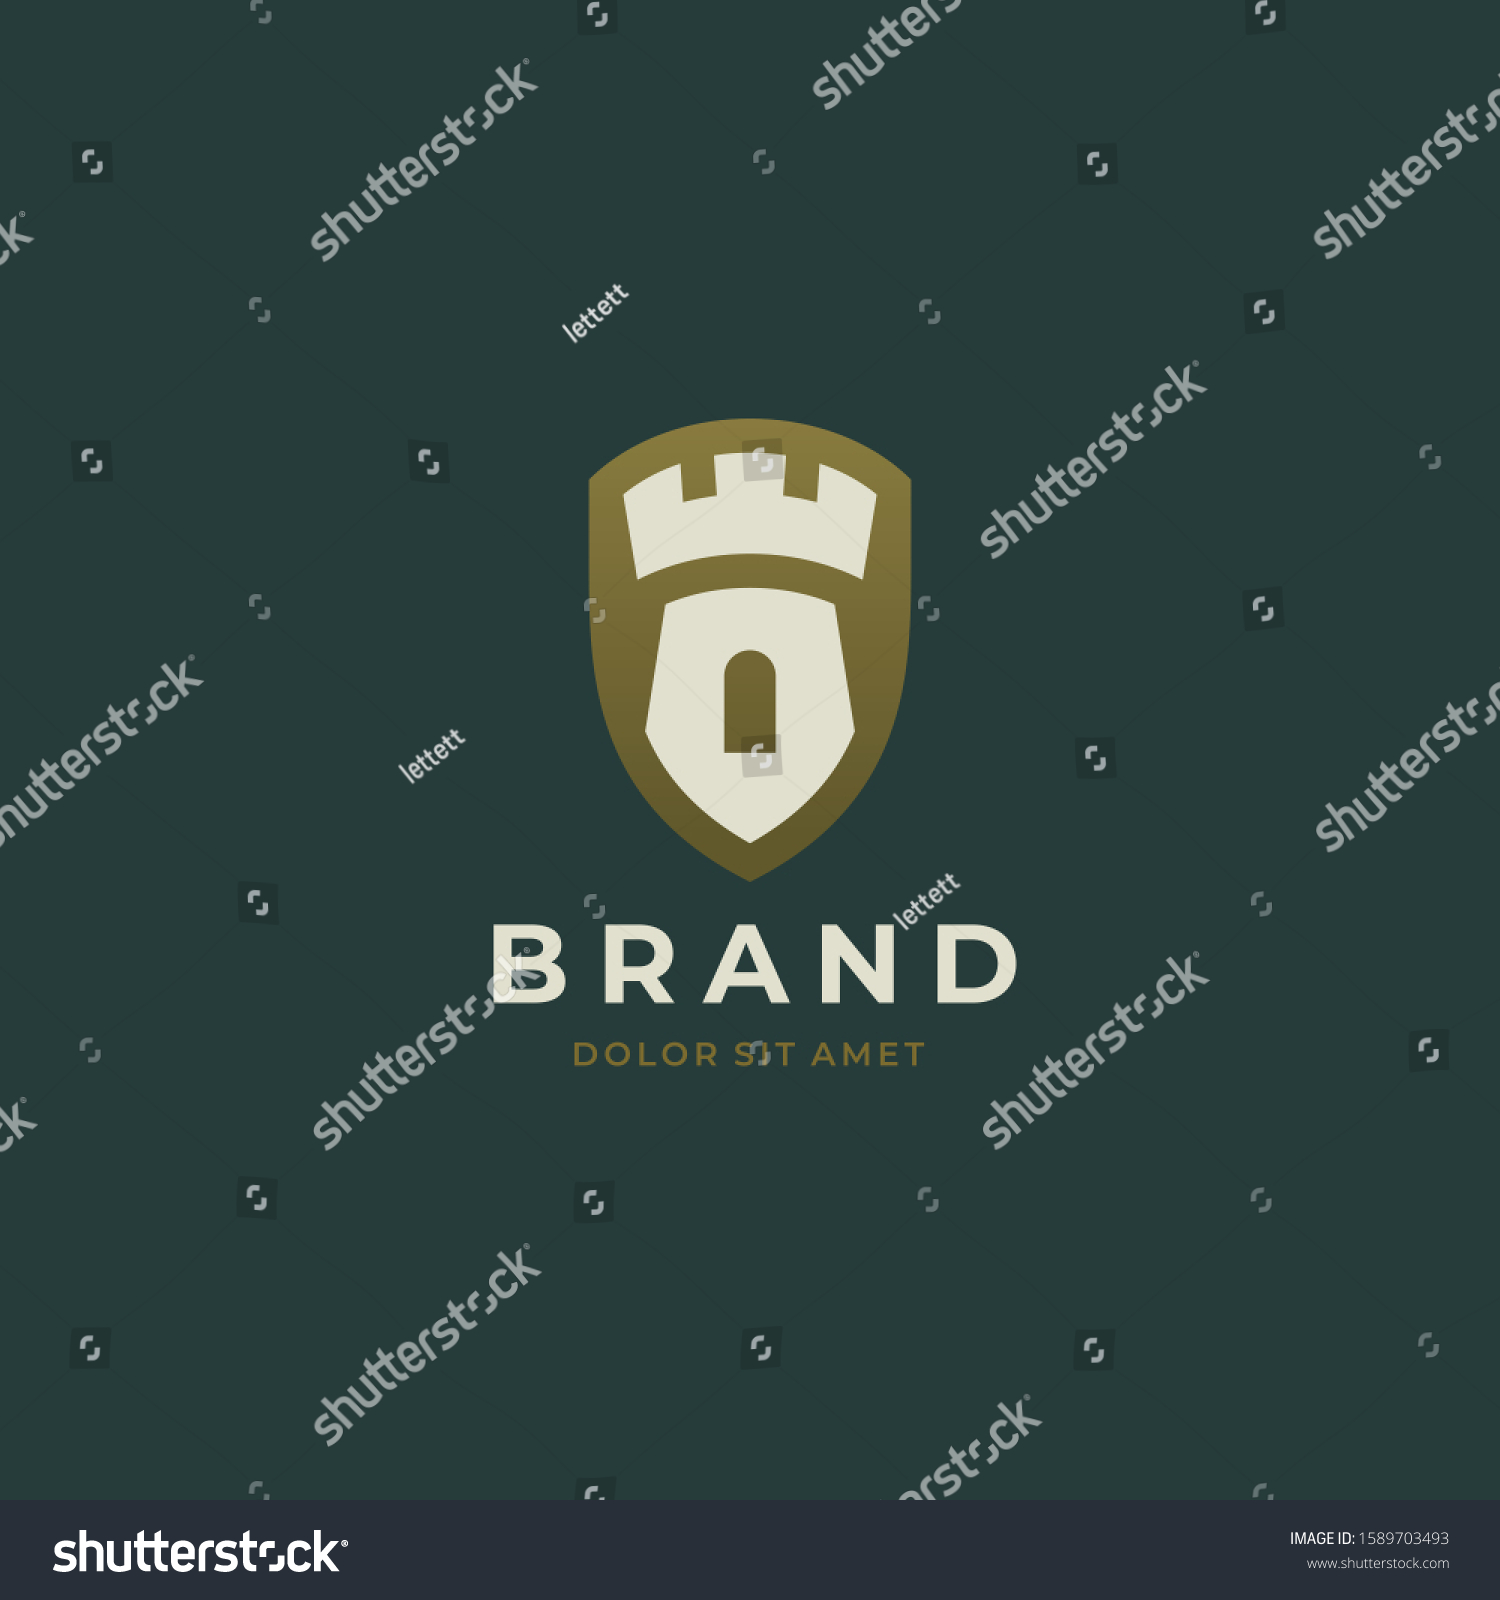 SVG of Castle shield logo. Tower, fortress, bastion icon. Real estate, protection, building, security, guard, architecture business logo design template. Vector illustration. svg